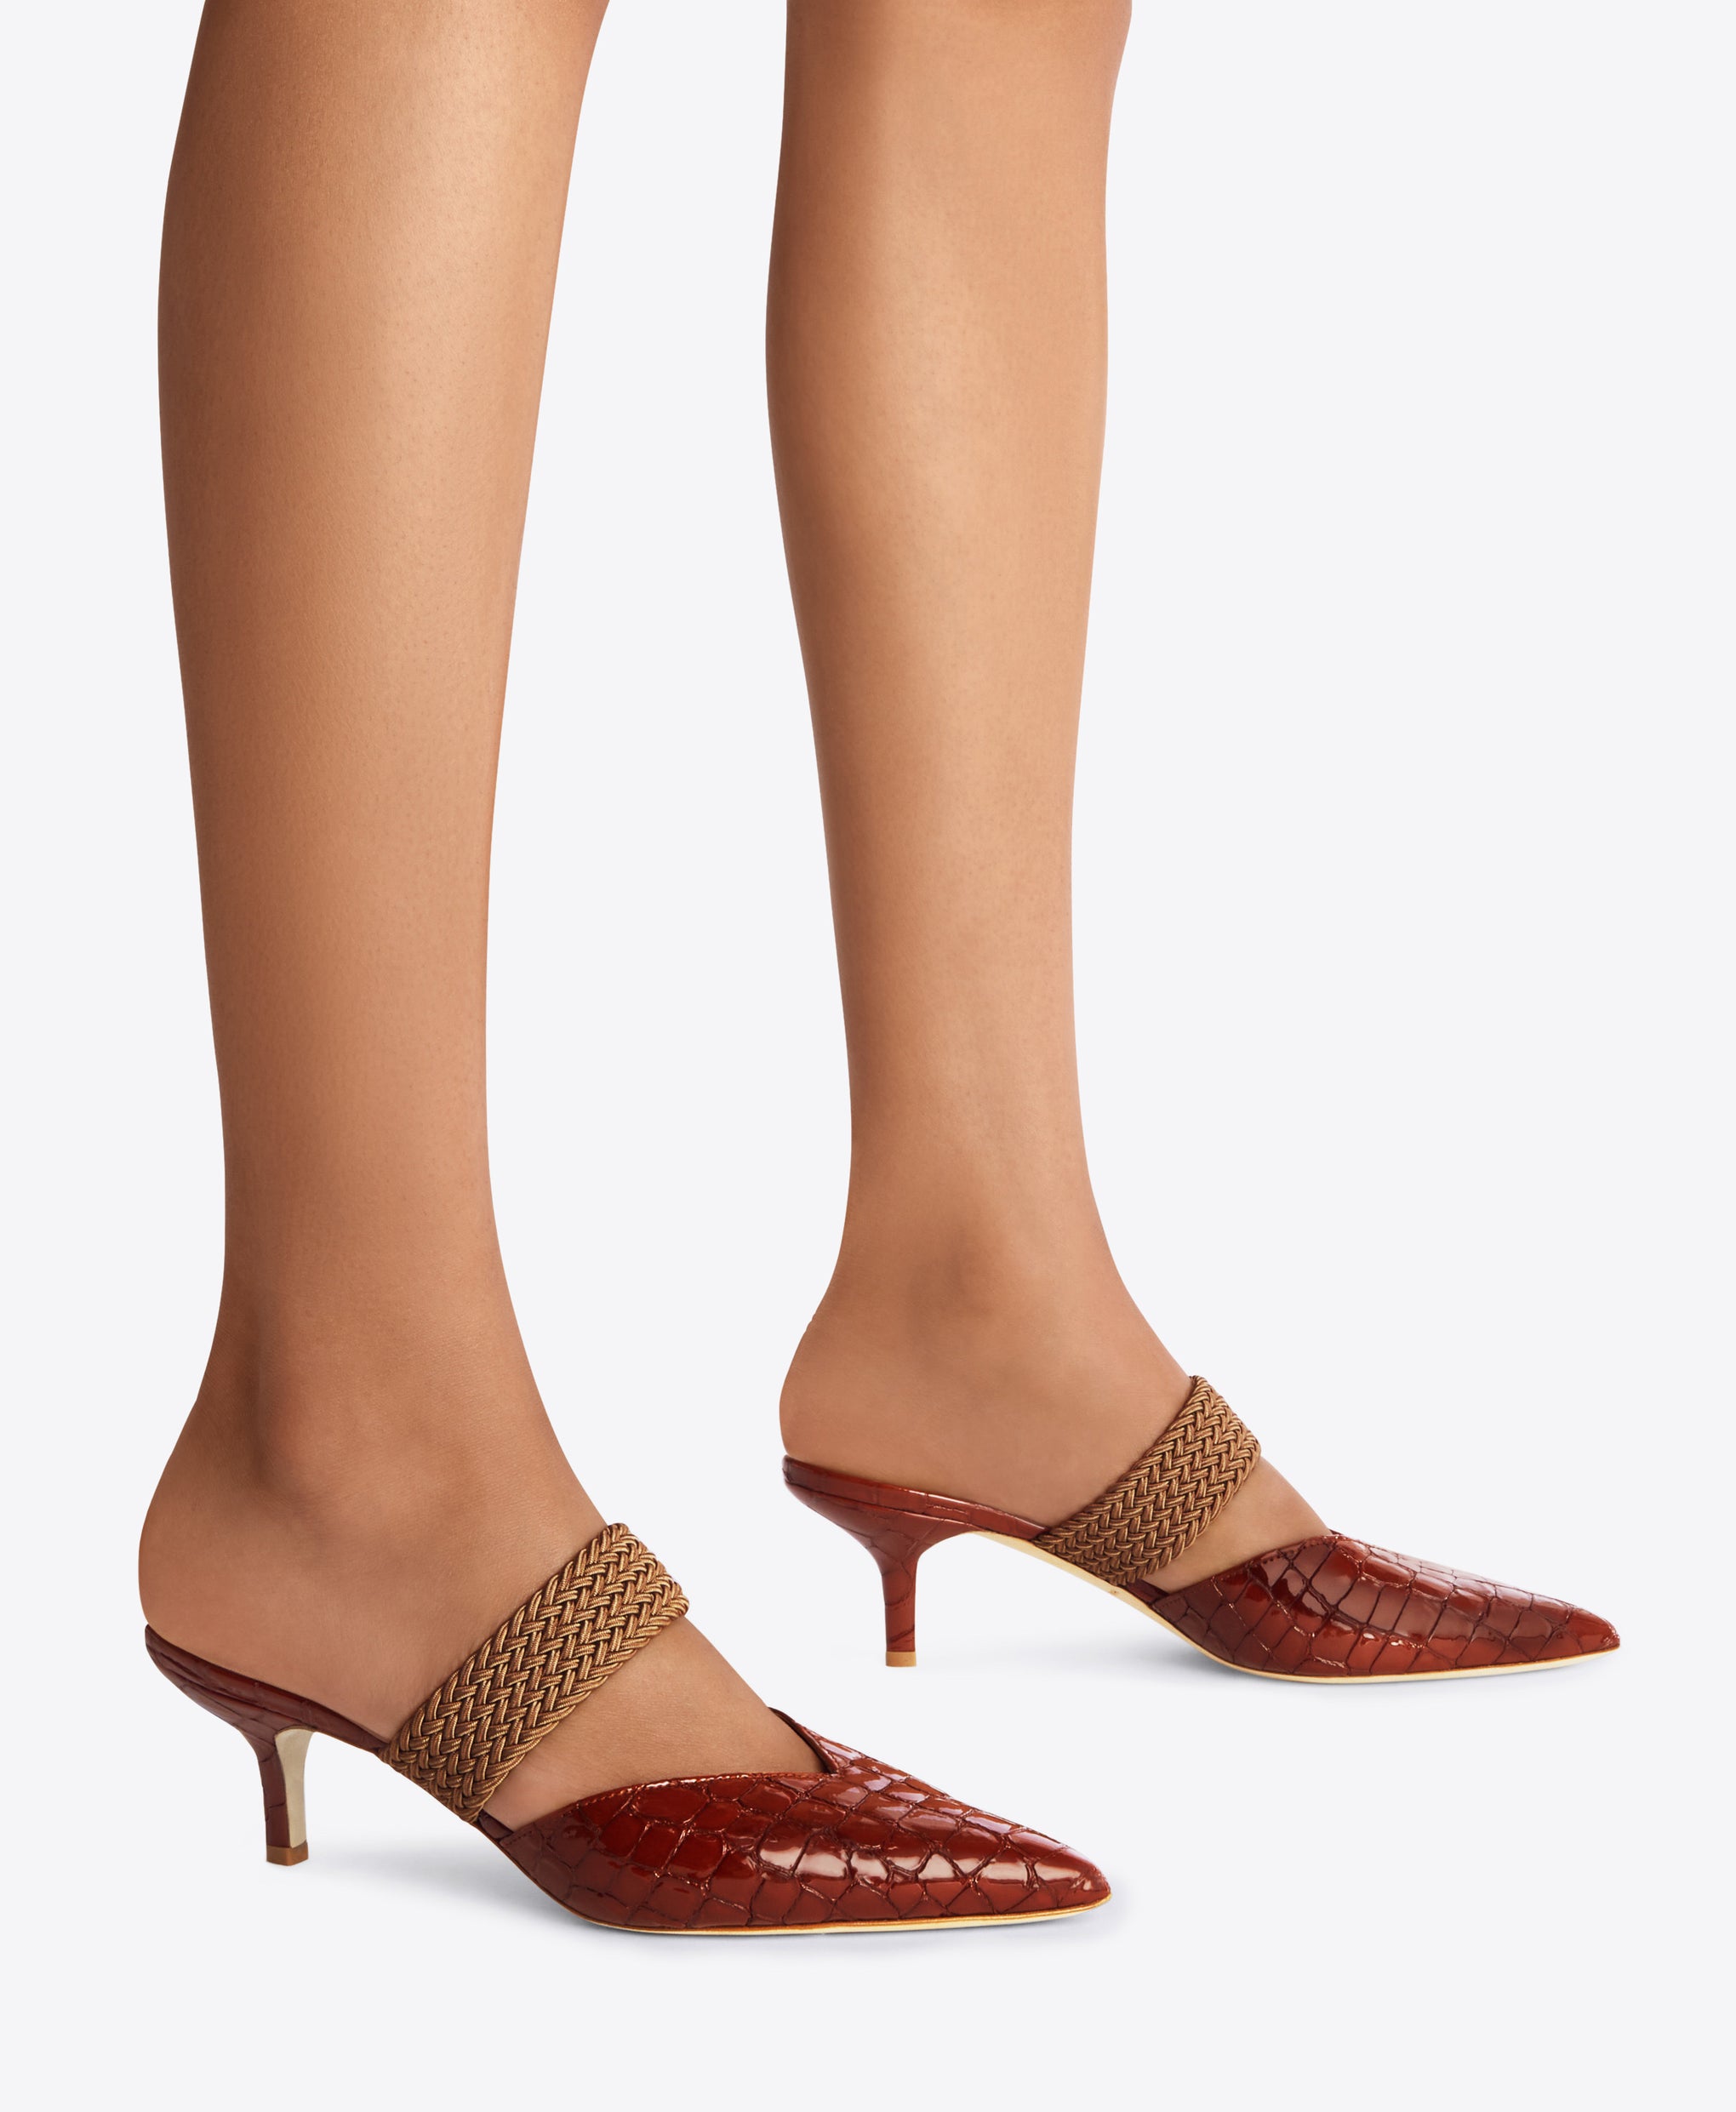 Brown Embossed Patent Stiletto Mules - Pointed Toe with Elastic Strap | Malone Souliers 